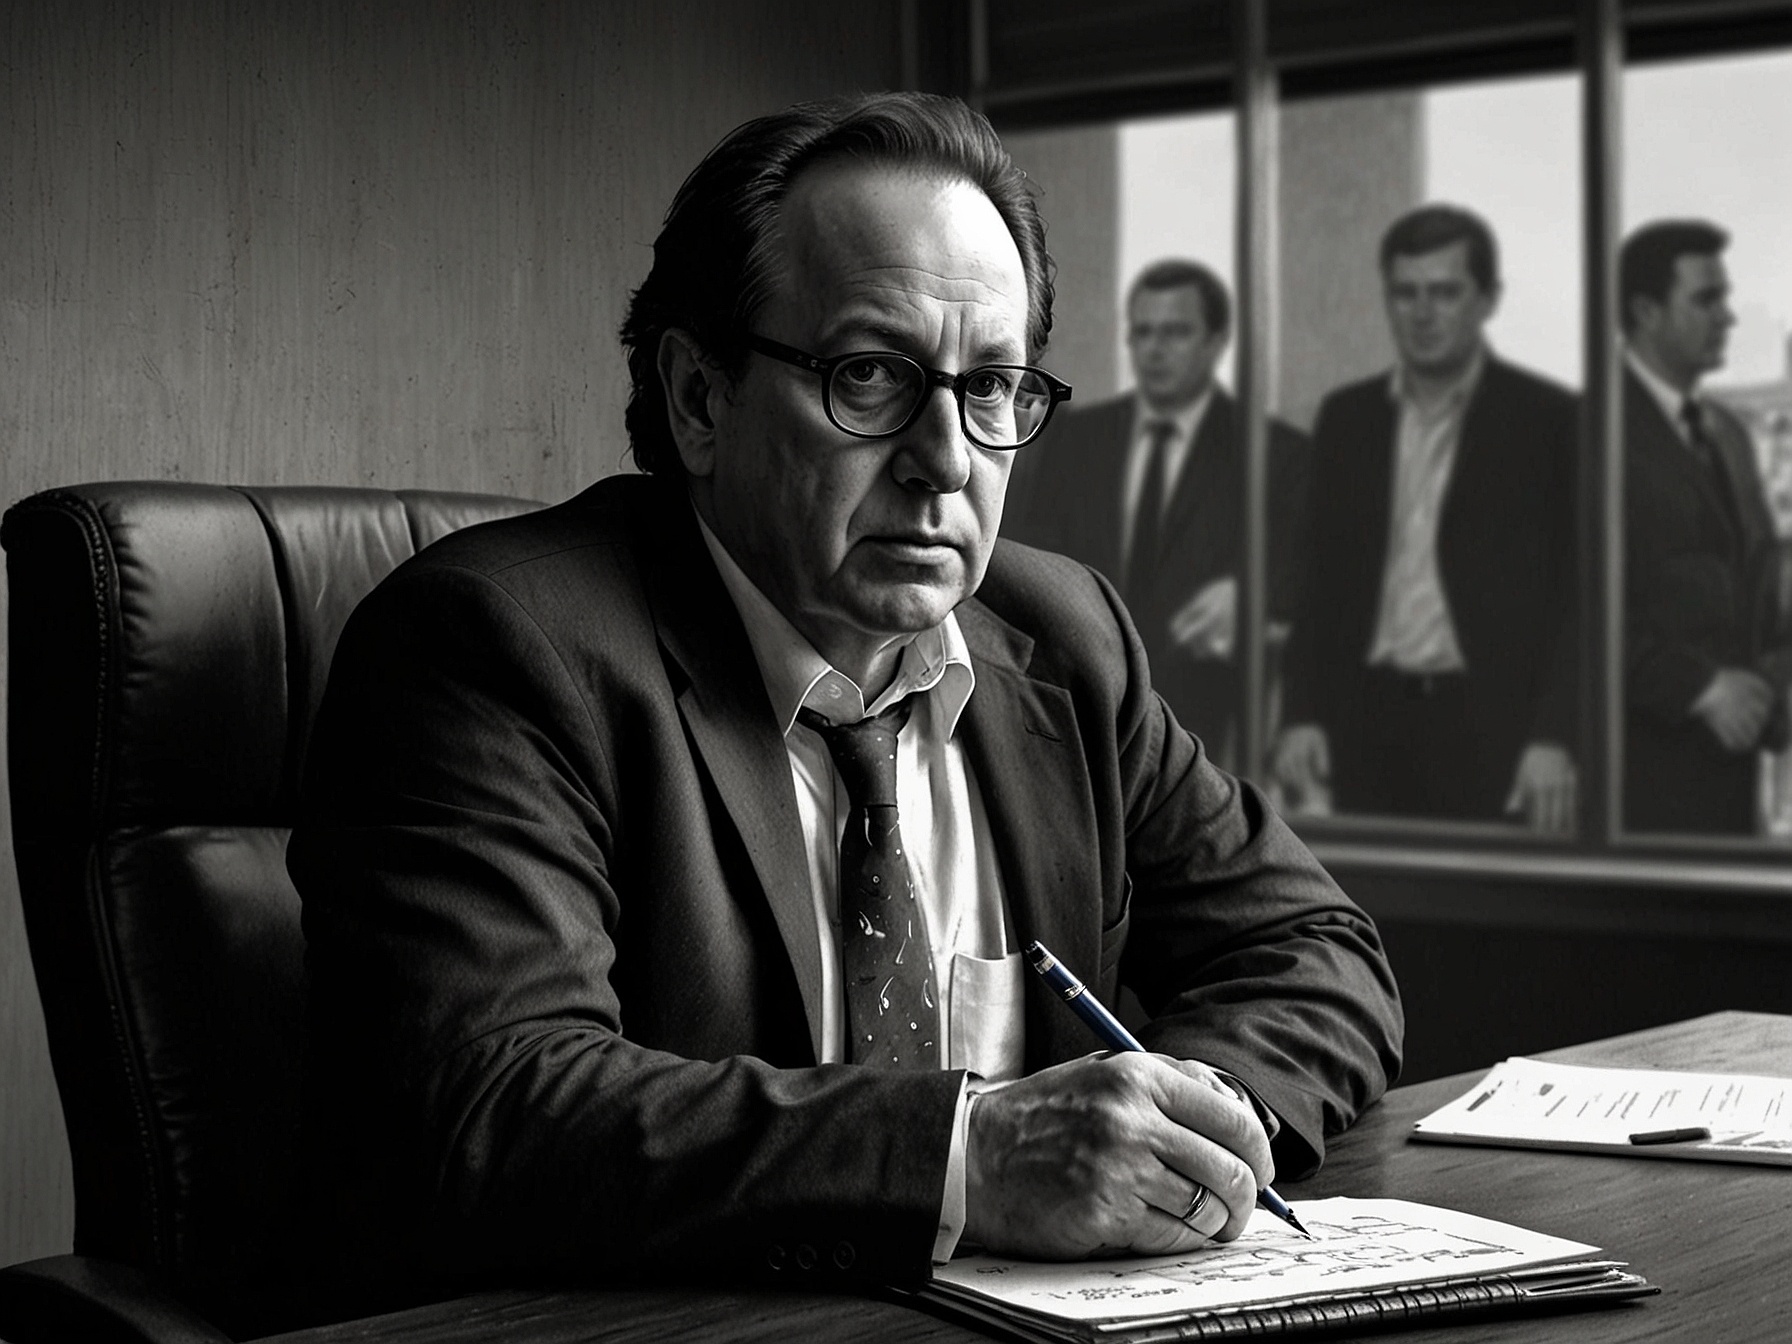 Dan Friedkin during a meeting, symbolizing his behind-the-scenes operational style, which he might bring to Everton. His 'seen not heard' approach could redefine how the club is managed.